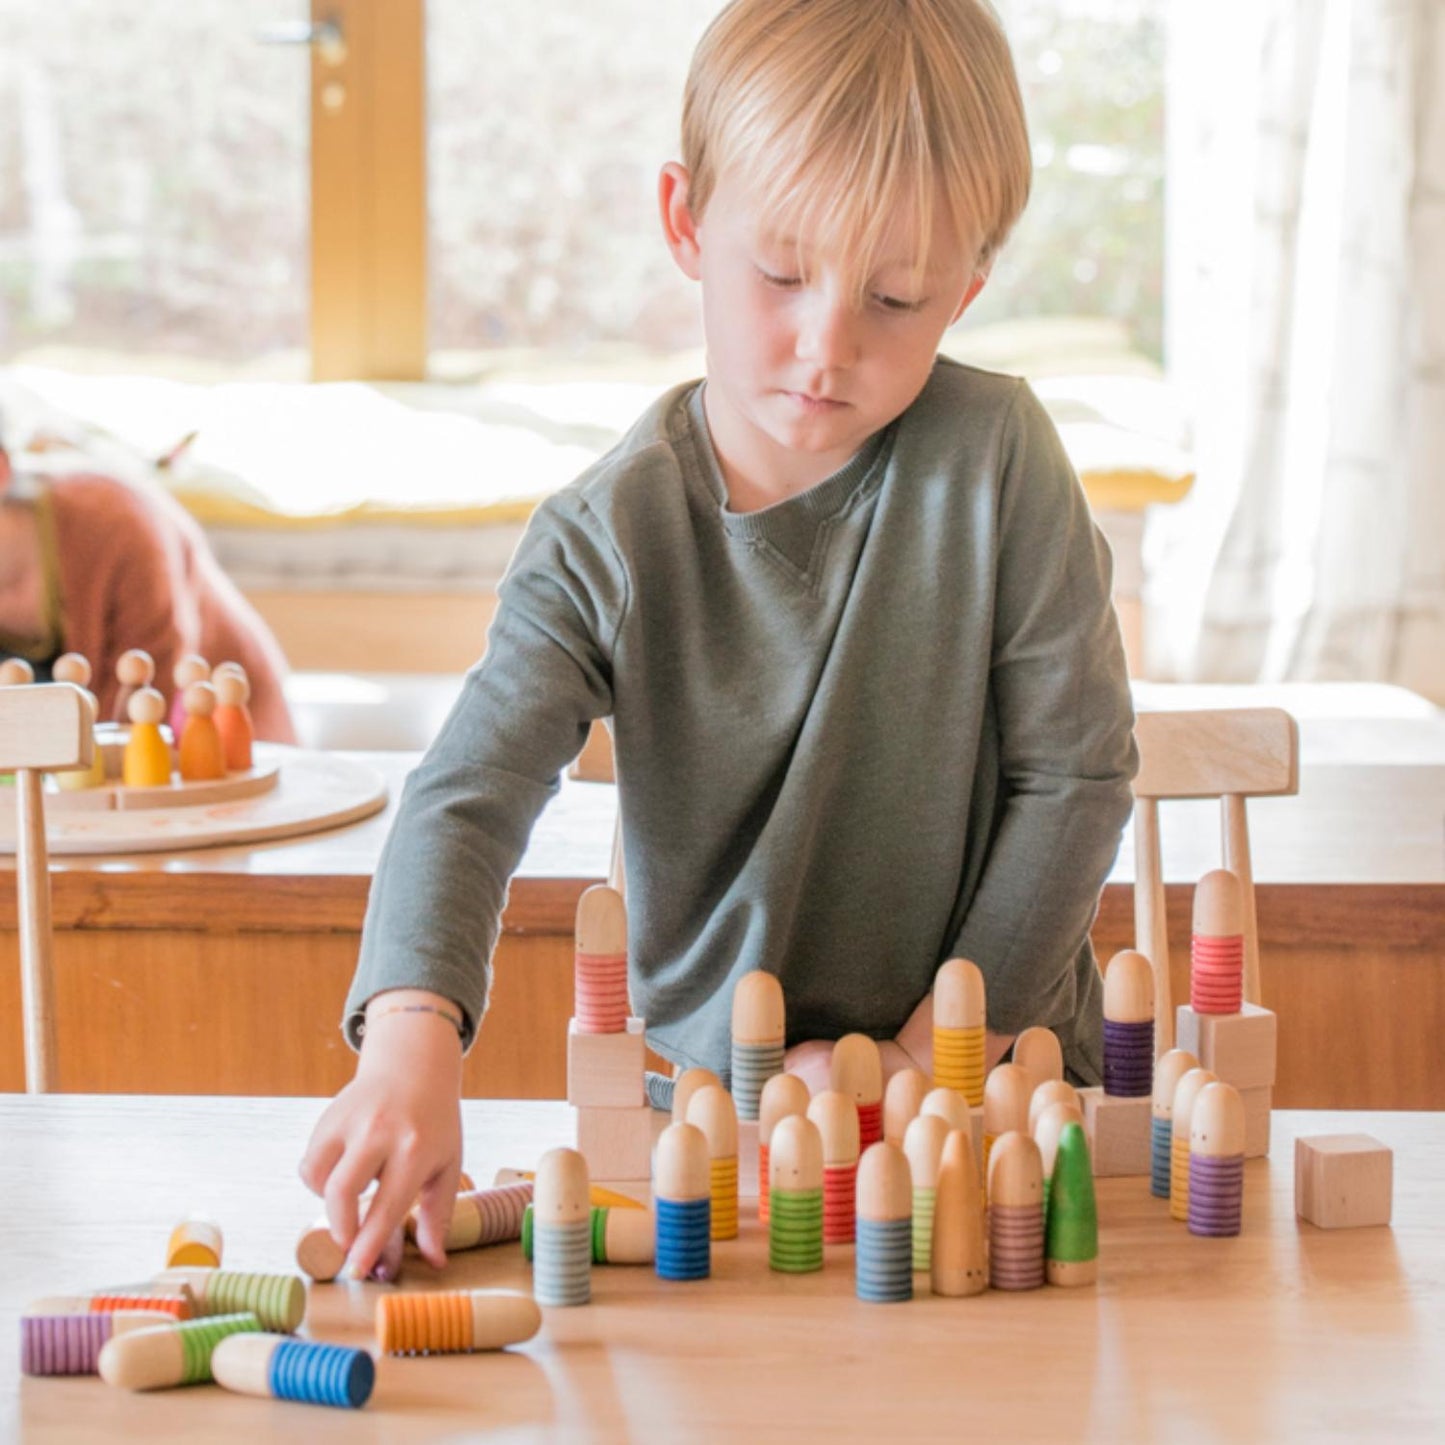 Grapat Brots | Wooden Toys for Kids | Open-Ended Play Set | Lifestyle: Boy Playing with Grapat Brots | BeoVERDE.ie